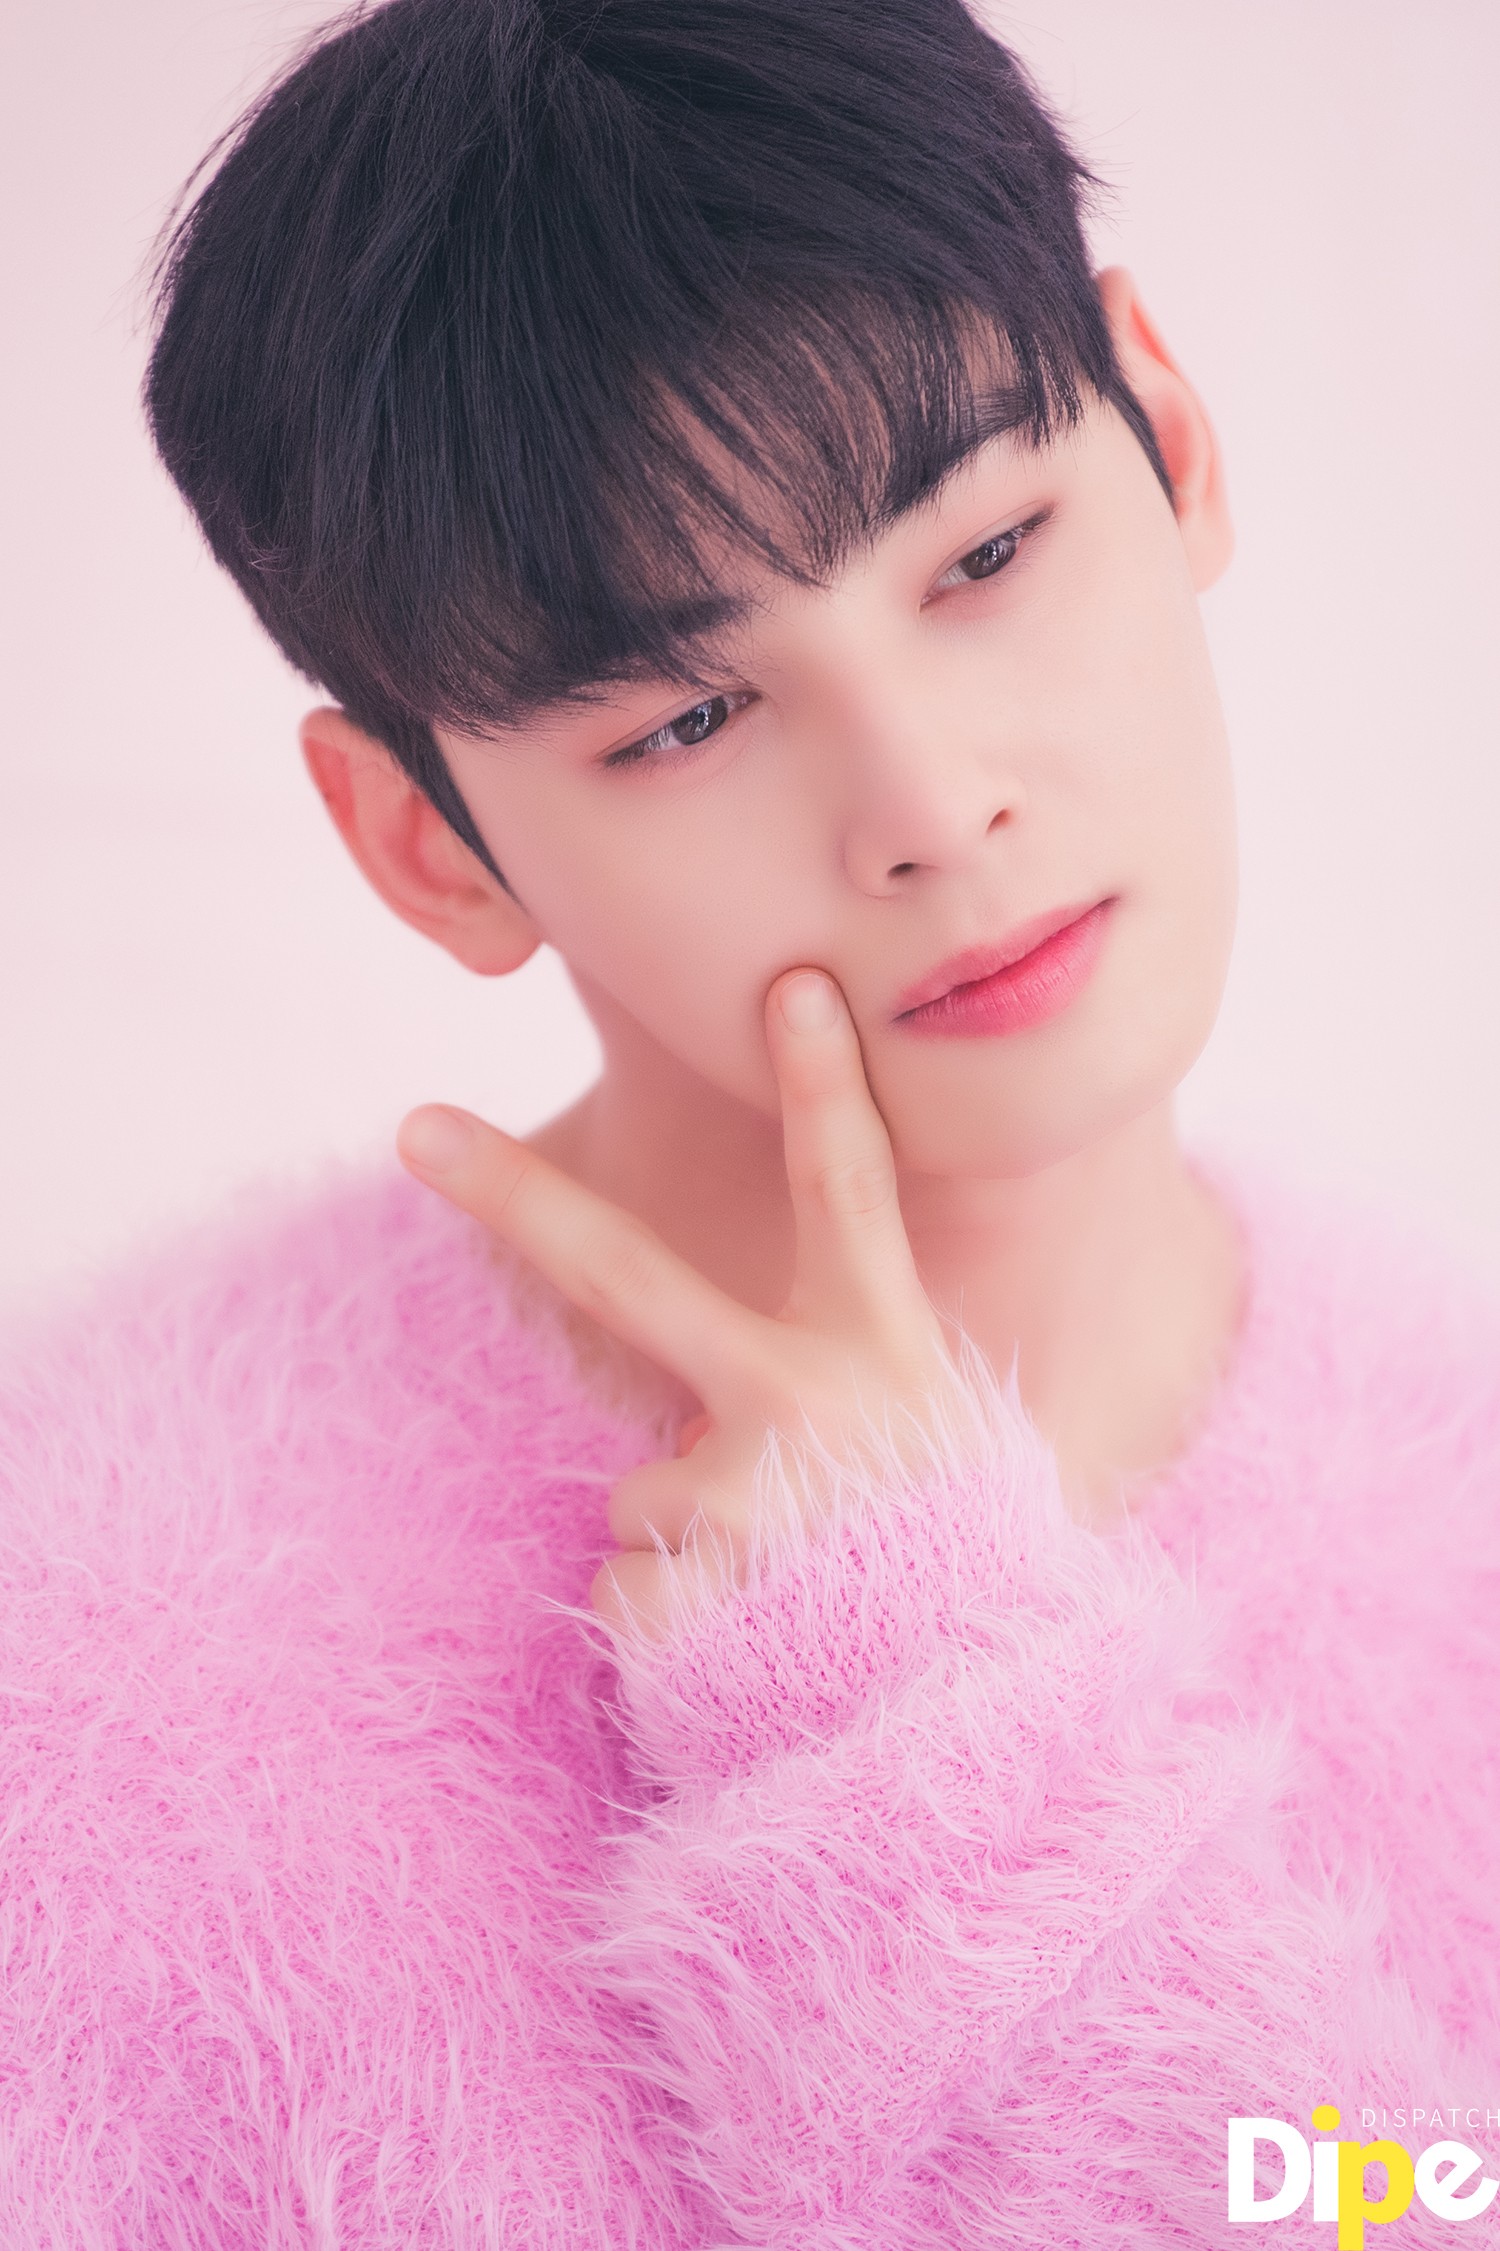 Hⓓ] Cha Eun Woo, and the Characteristics of Strikingly Handsome